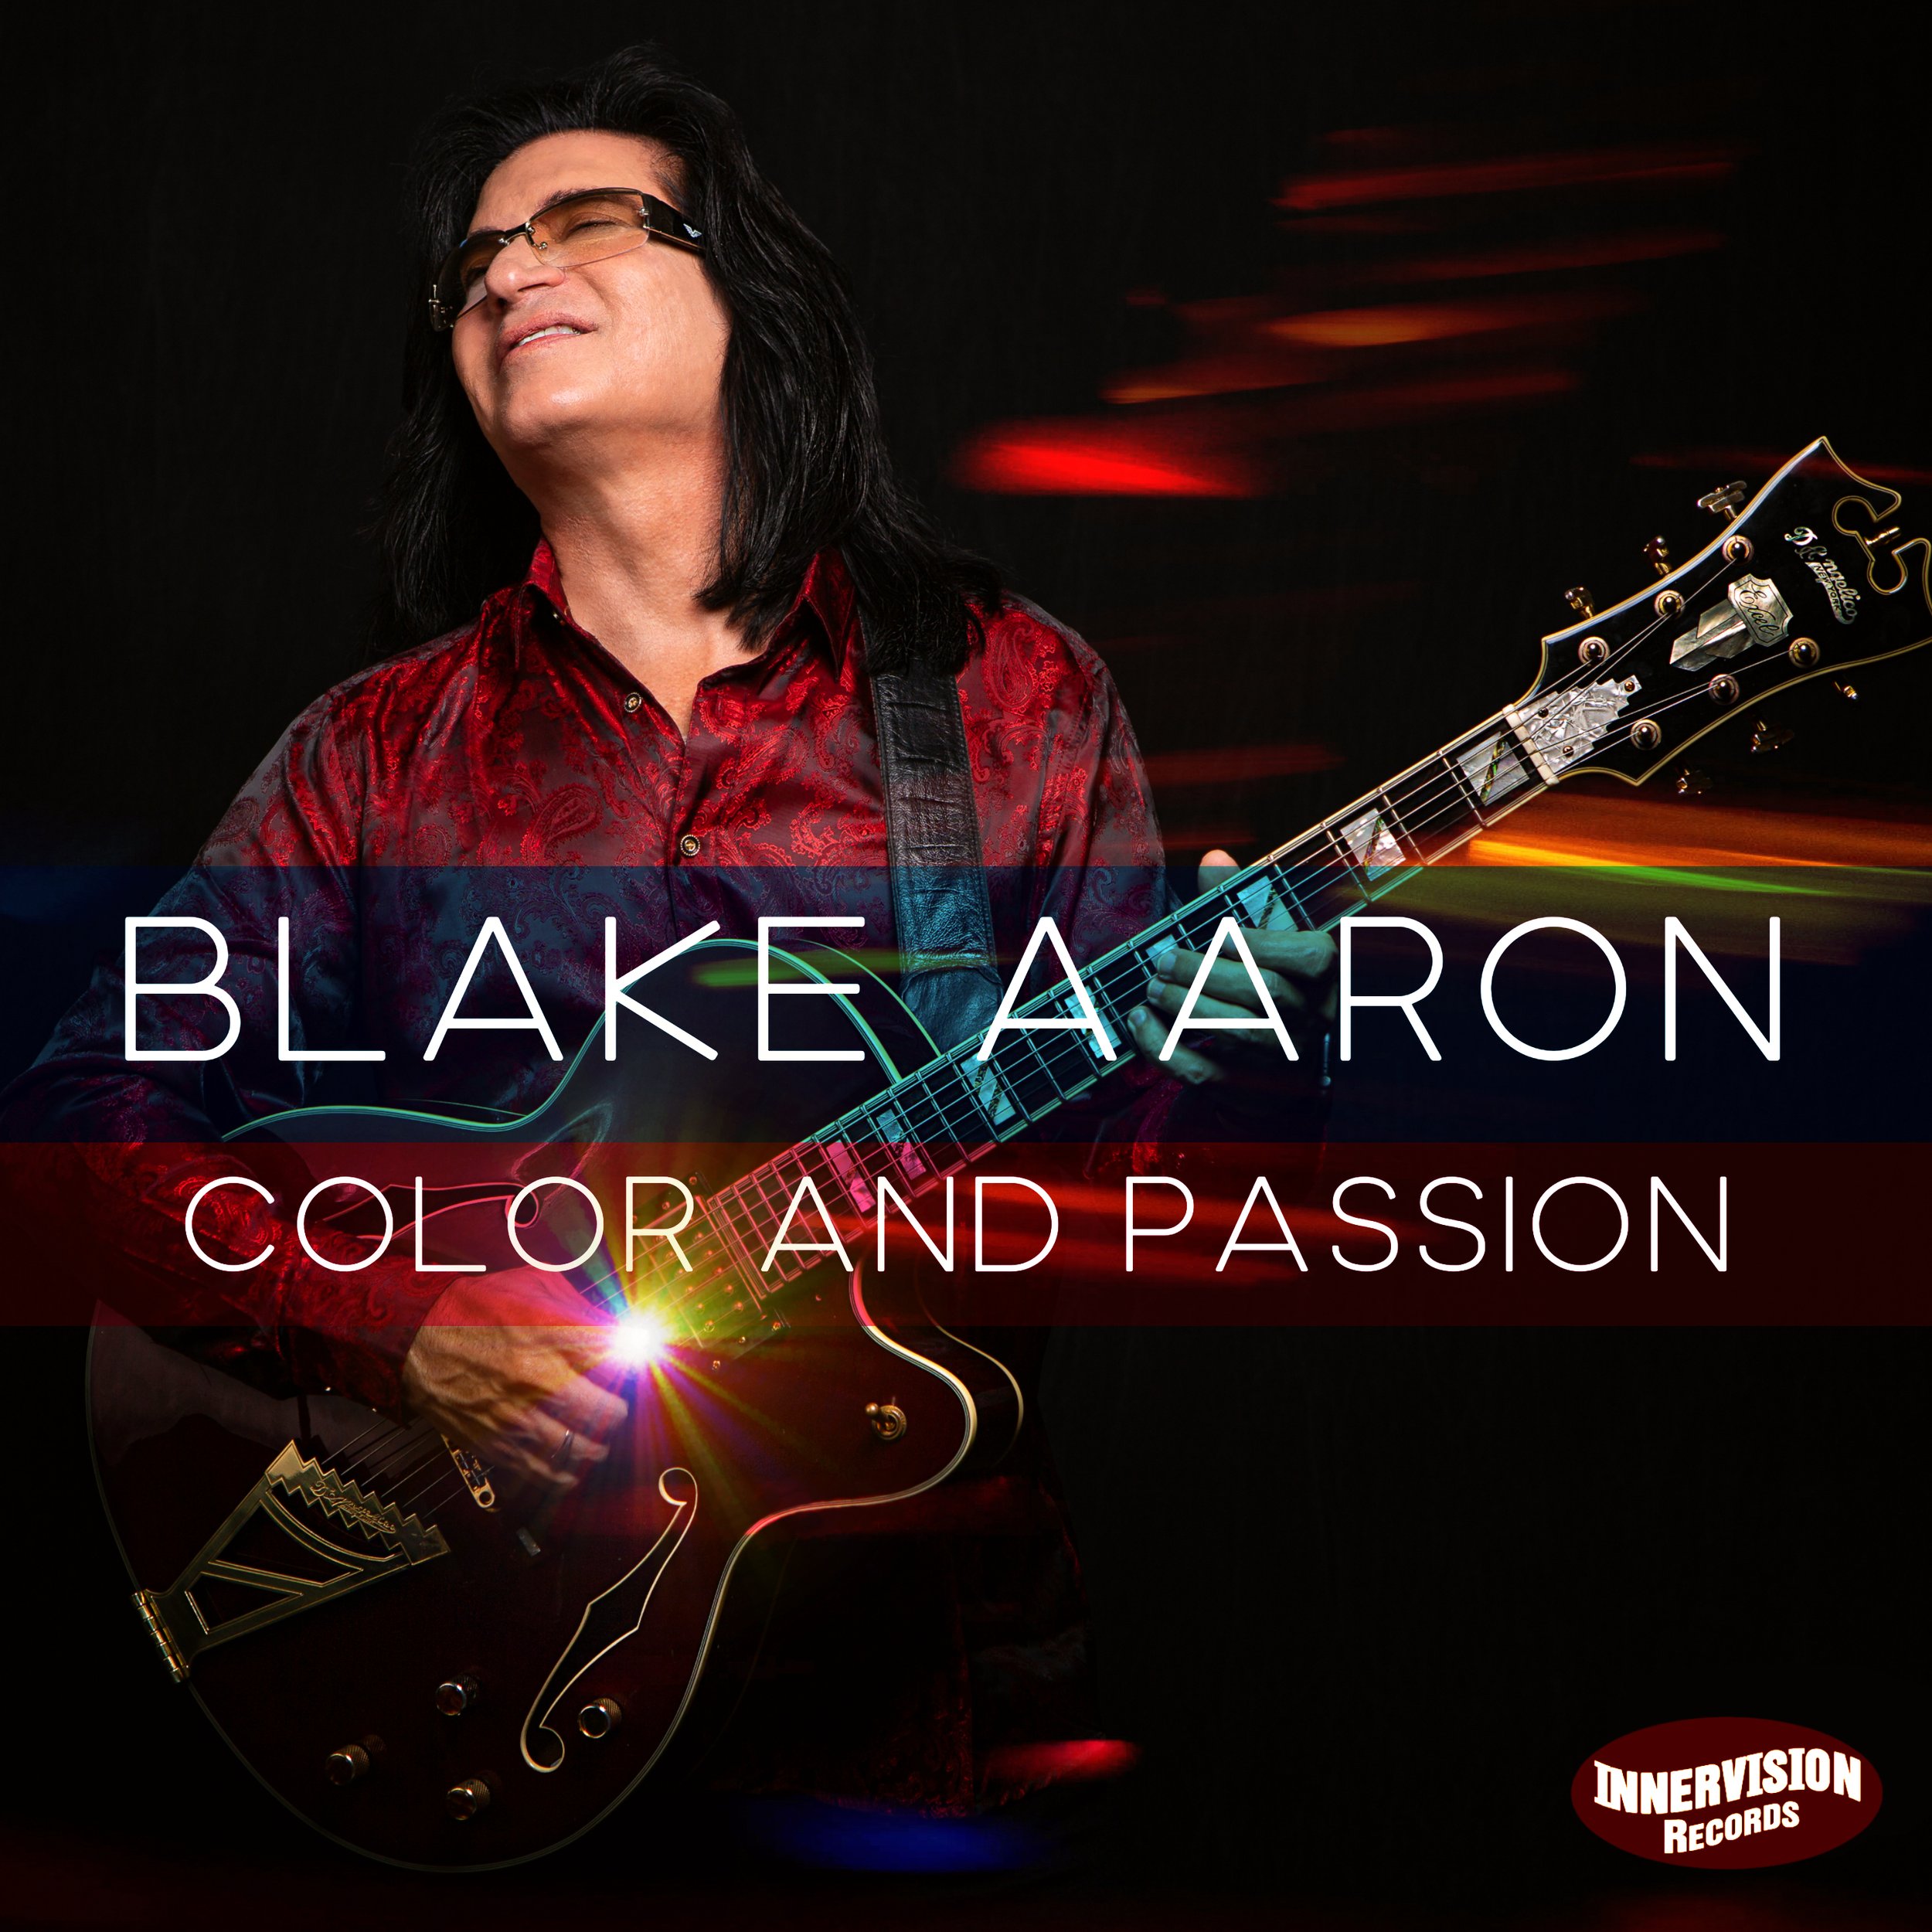 Blake Aaron Color and Passion Cover 070620 FINAL SQ.jpg